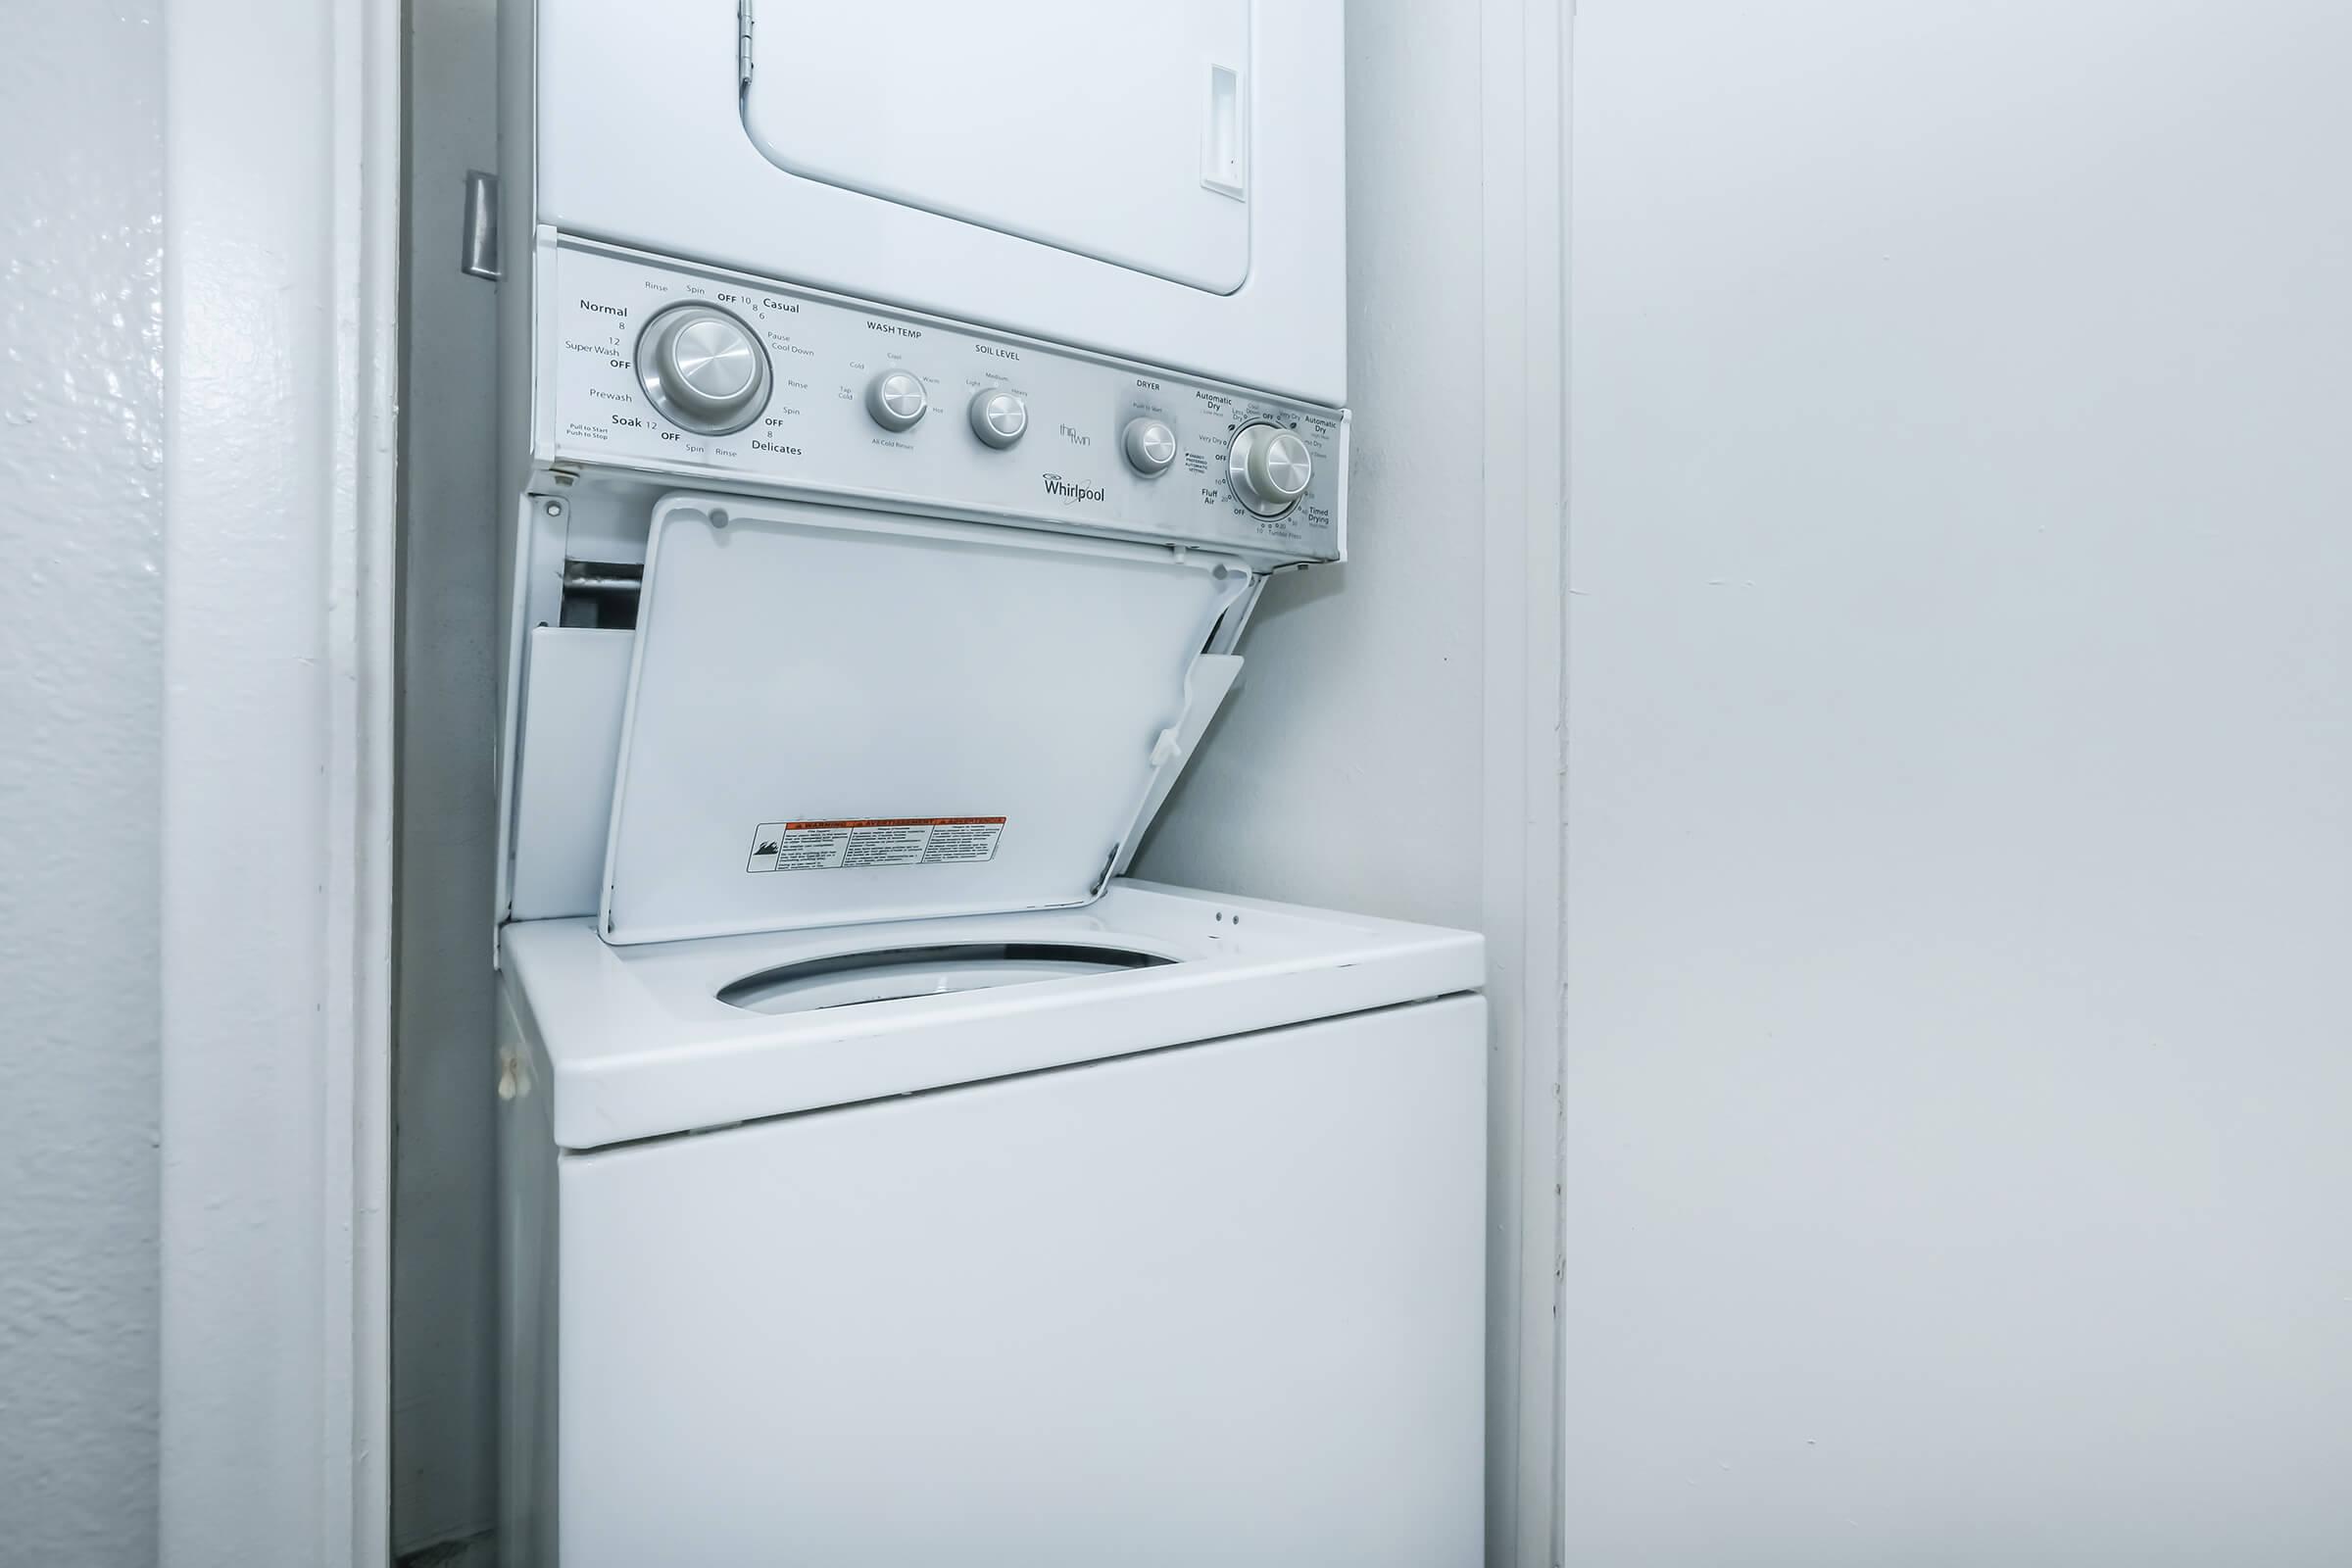 An apartment washer and dryer at Rise at the Meadows.